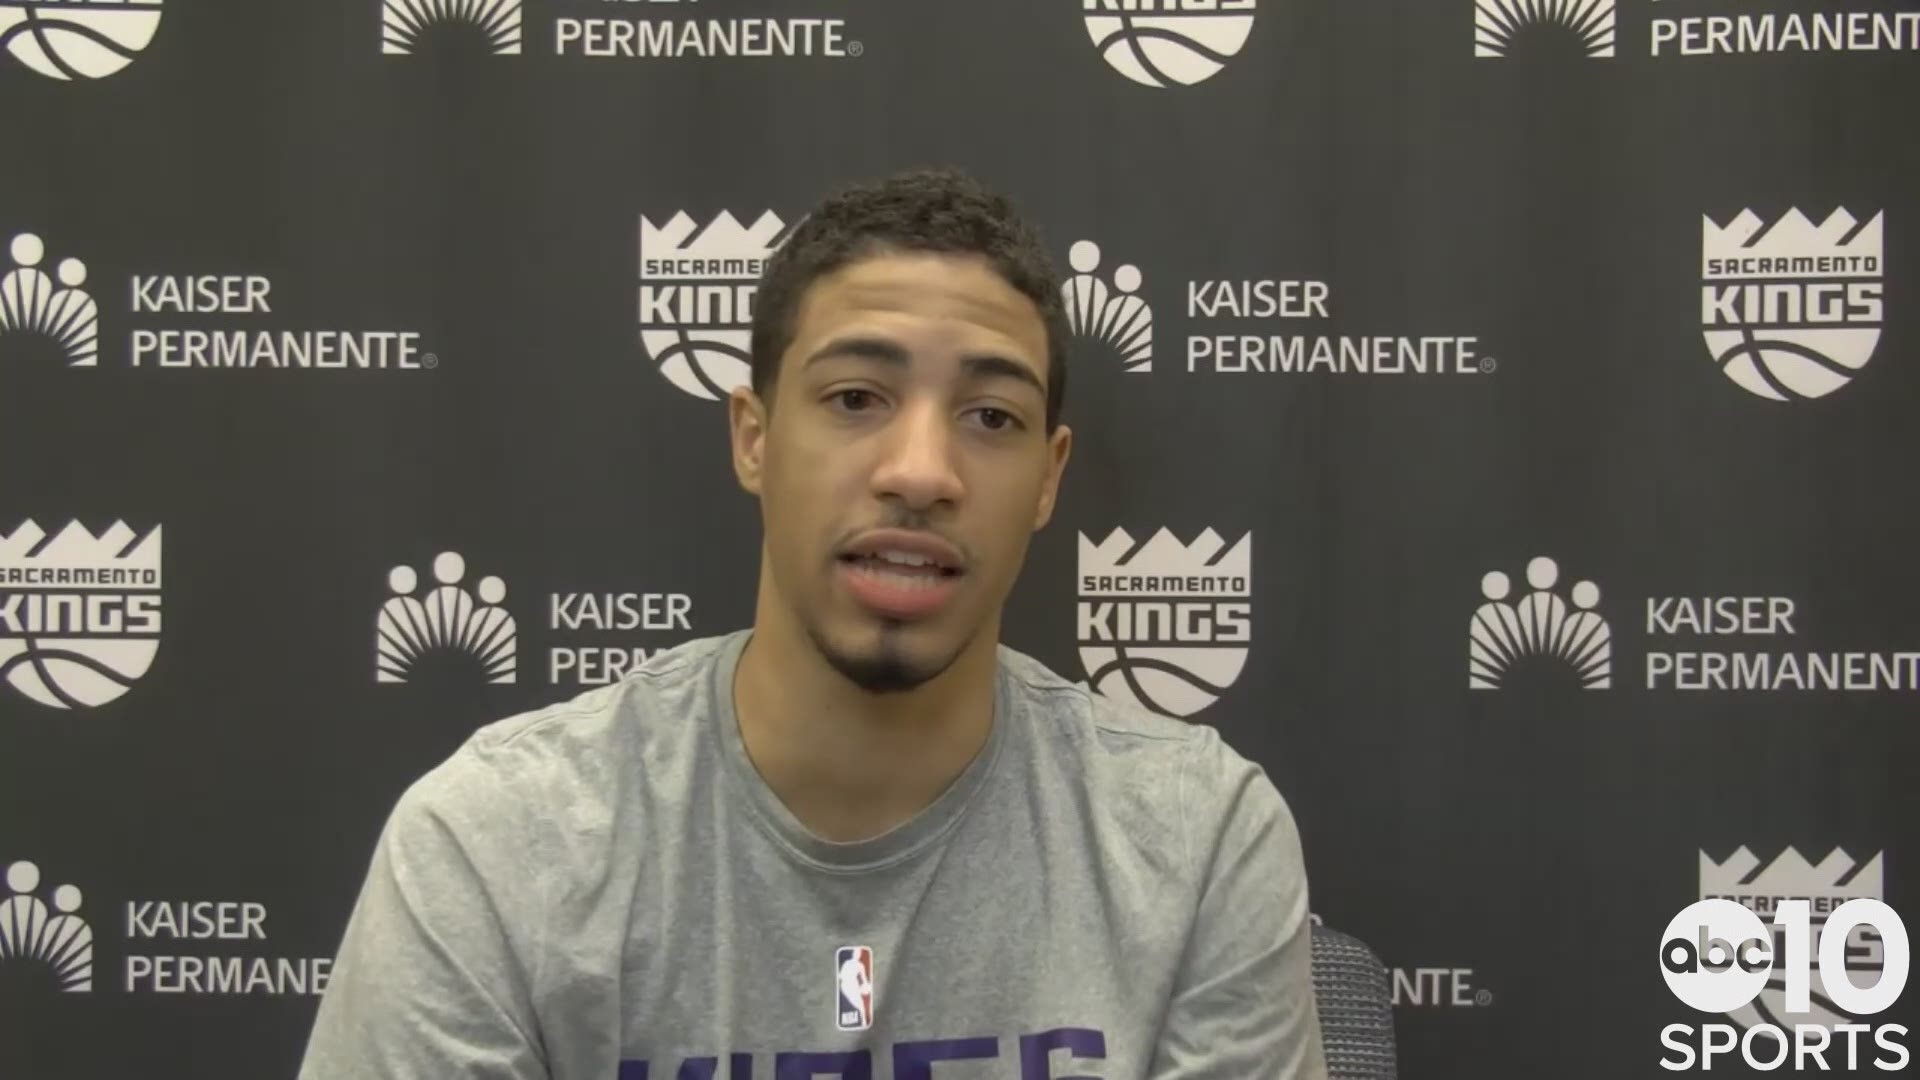 Tyrese Haliburton, who has been critical of his recent struggles, talks about his career night in the Kings' 119-105 victory over the Cavs & his "rookie wall."